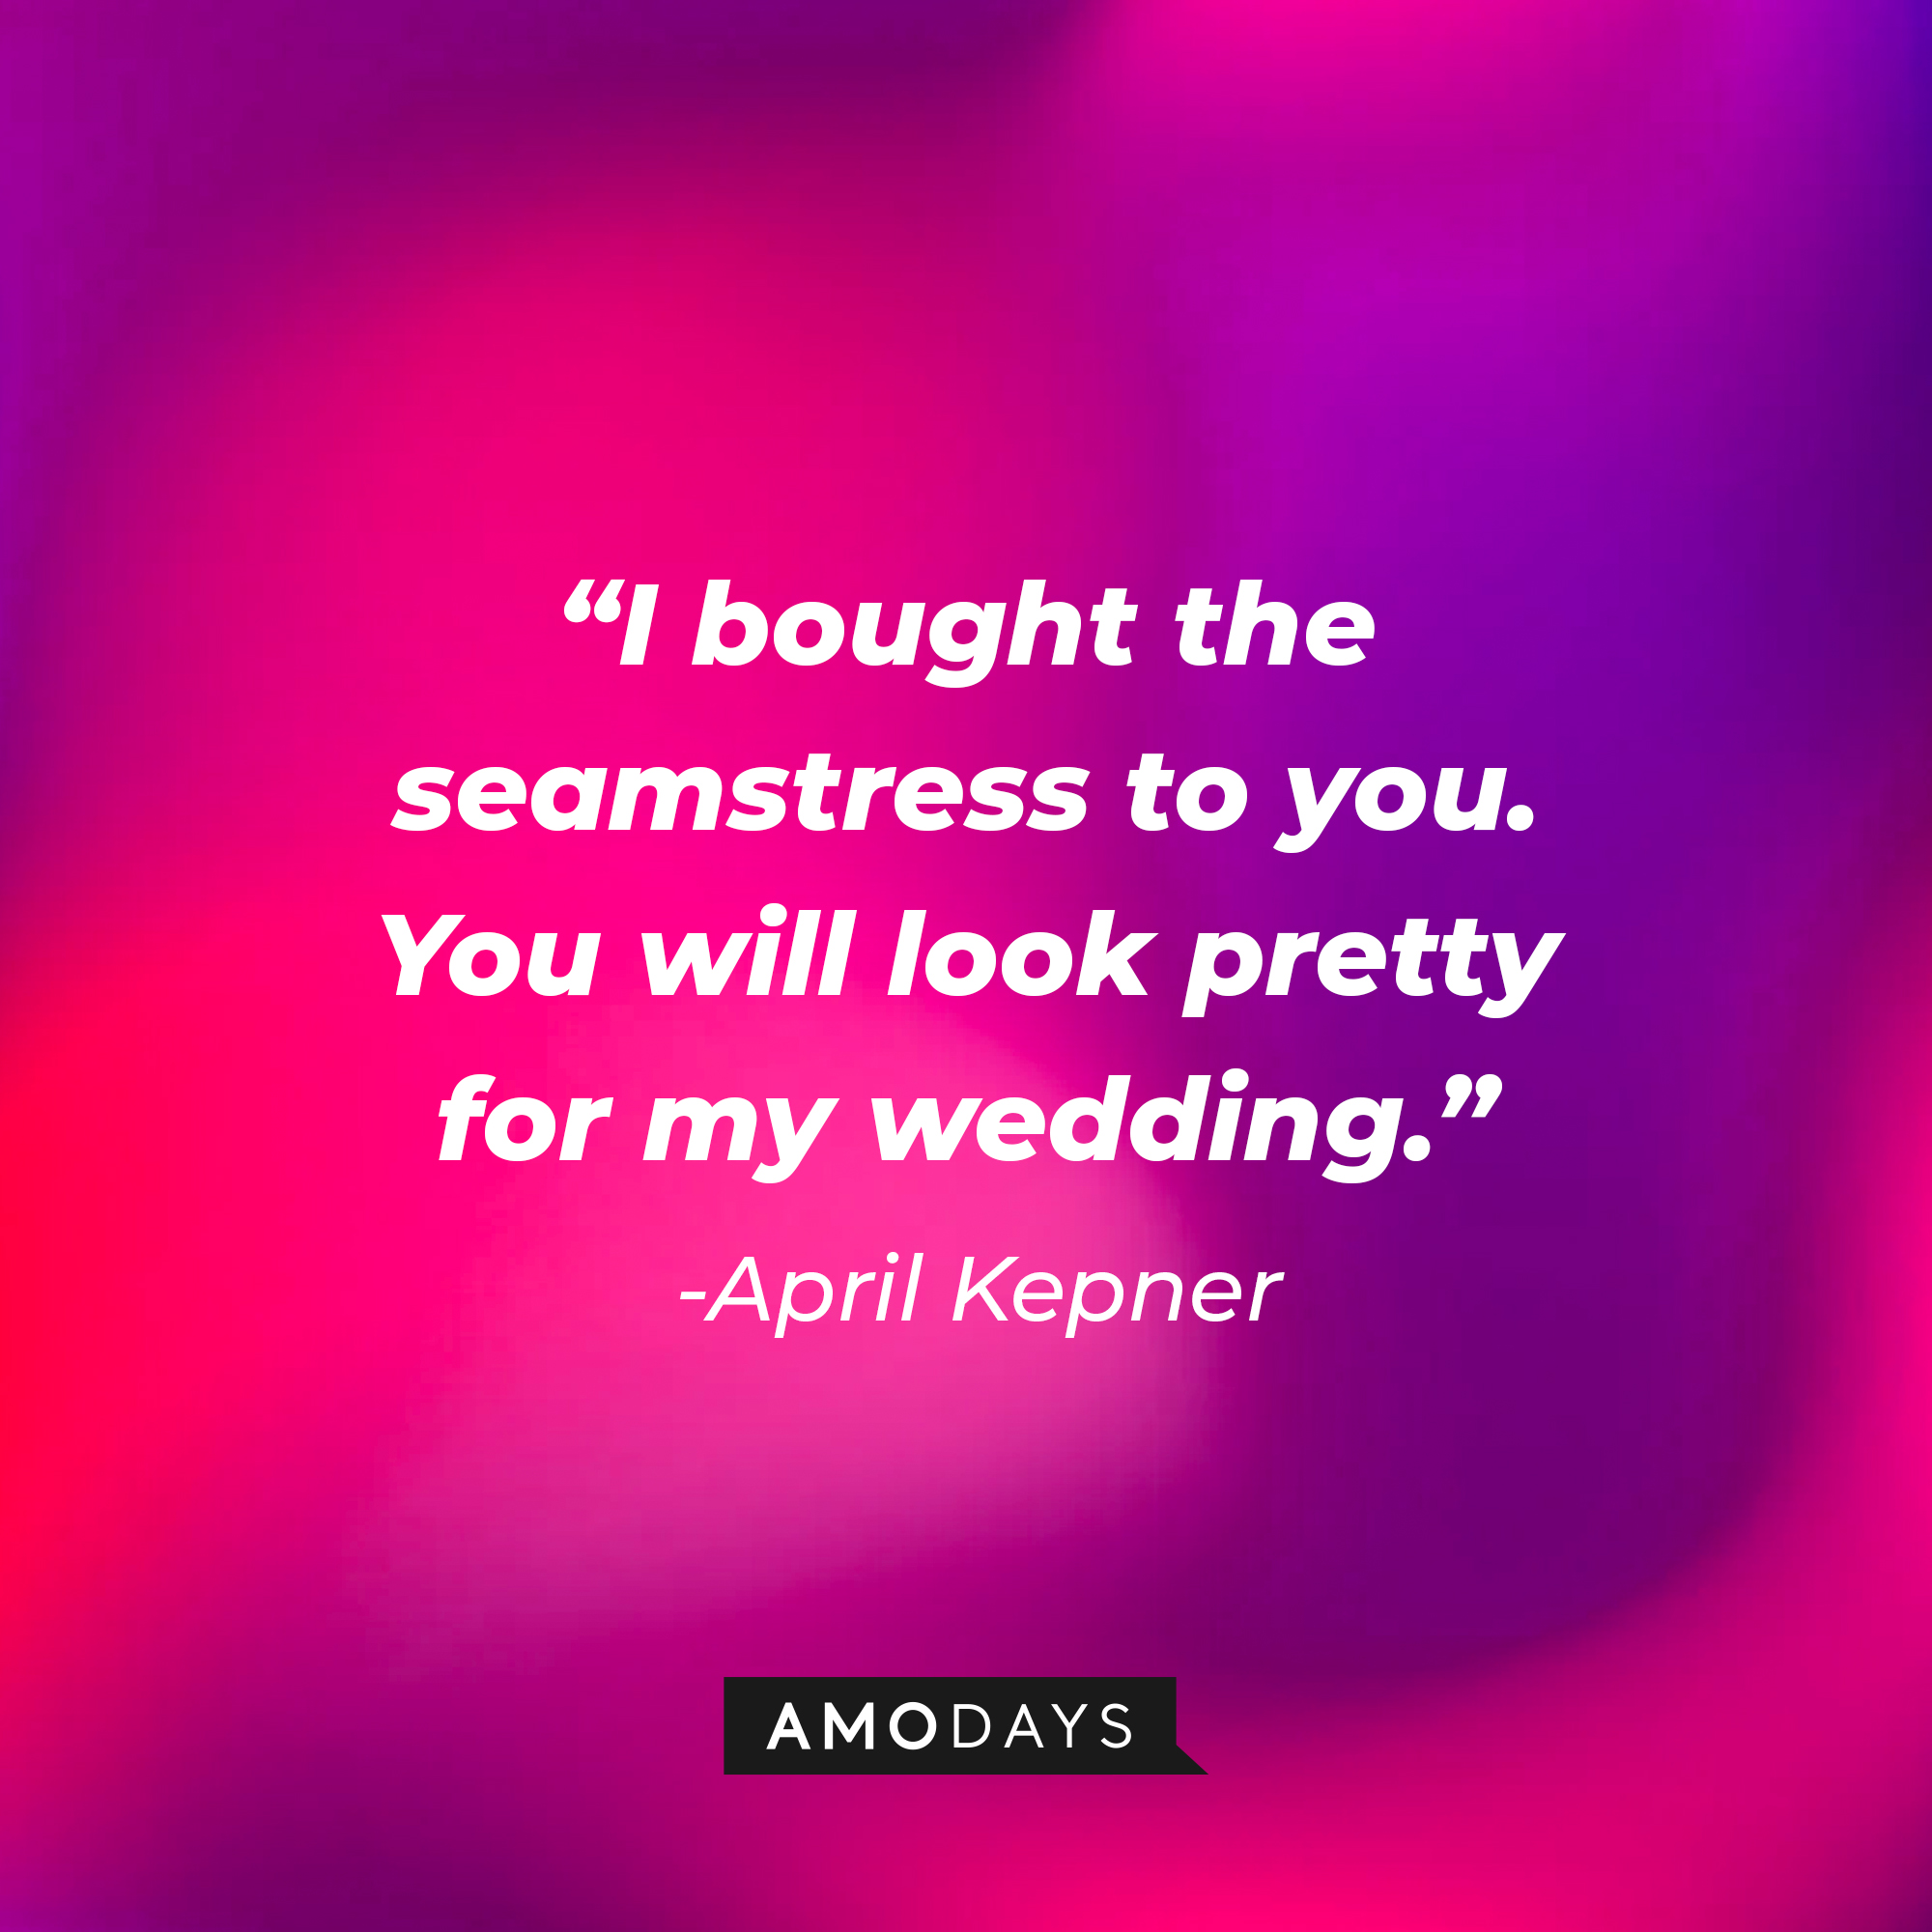 April Kepner's quote: "I bought the seamstress to you. You will look pretty for my wedding." | Source: AmoDays